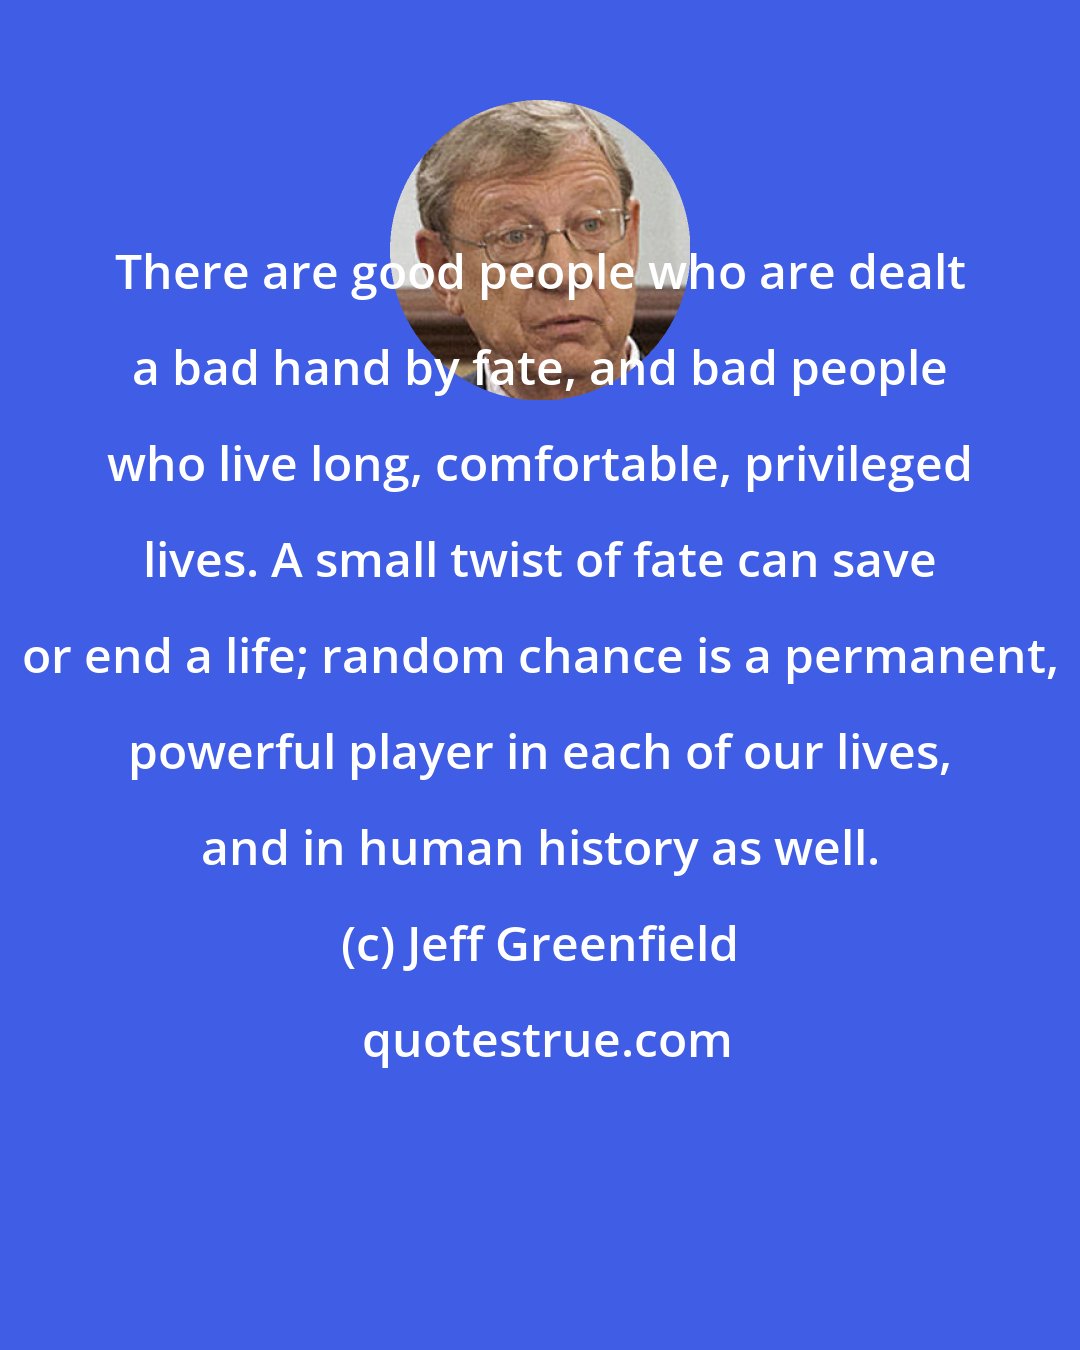 Jeff Greenfield: There are good people who are dealt a bad hand by fate, and bad people who live long, comfortable, privileged lives. A small twist of fate can save or end a life; random chance is a permanent, powerful player in each of our lives, and in human history as well.